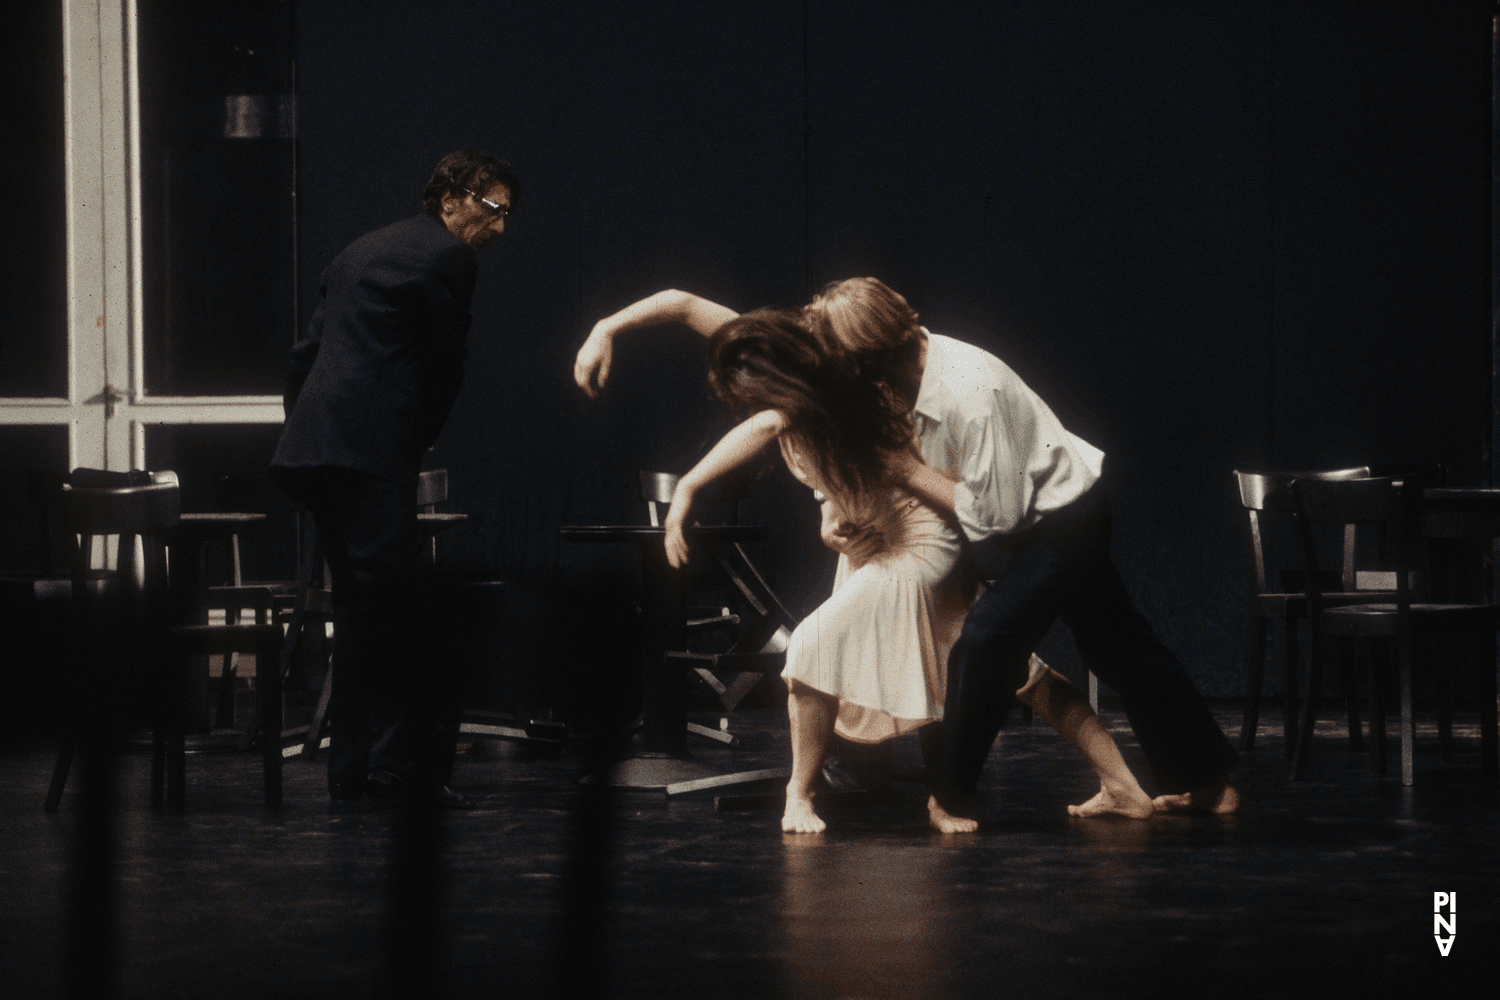 Dominique Mercy, Malou Airaudo and Jean Laurent Sasportes in “Café Müller” by Pina Bausch